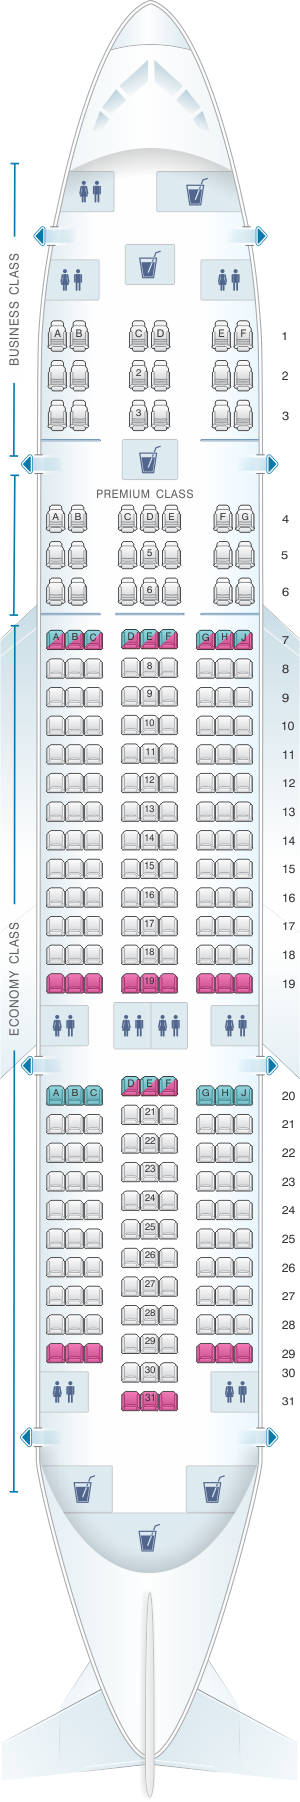 Seat map for LOT Polish Airlines Boeing B787 Dreamliner